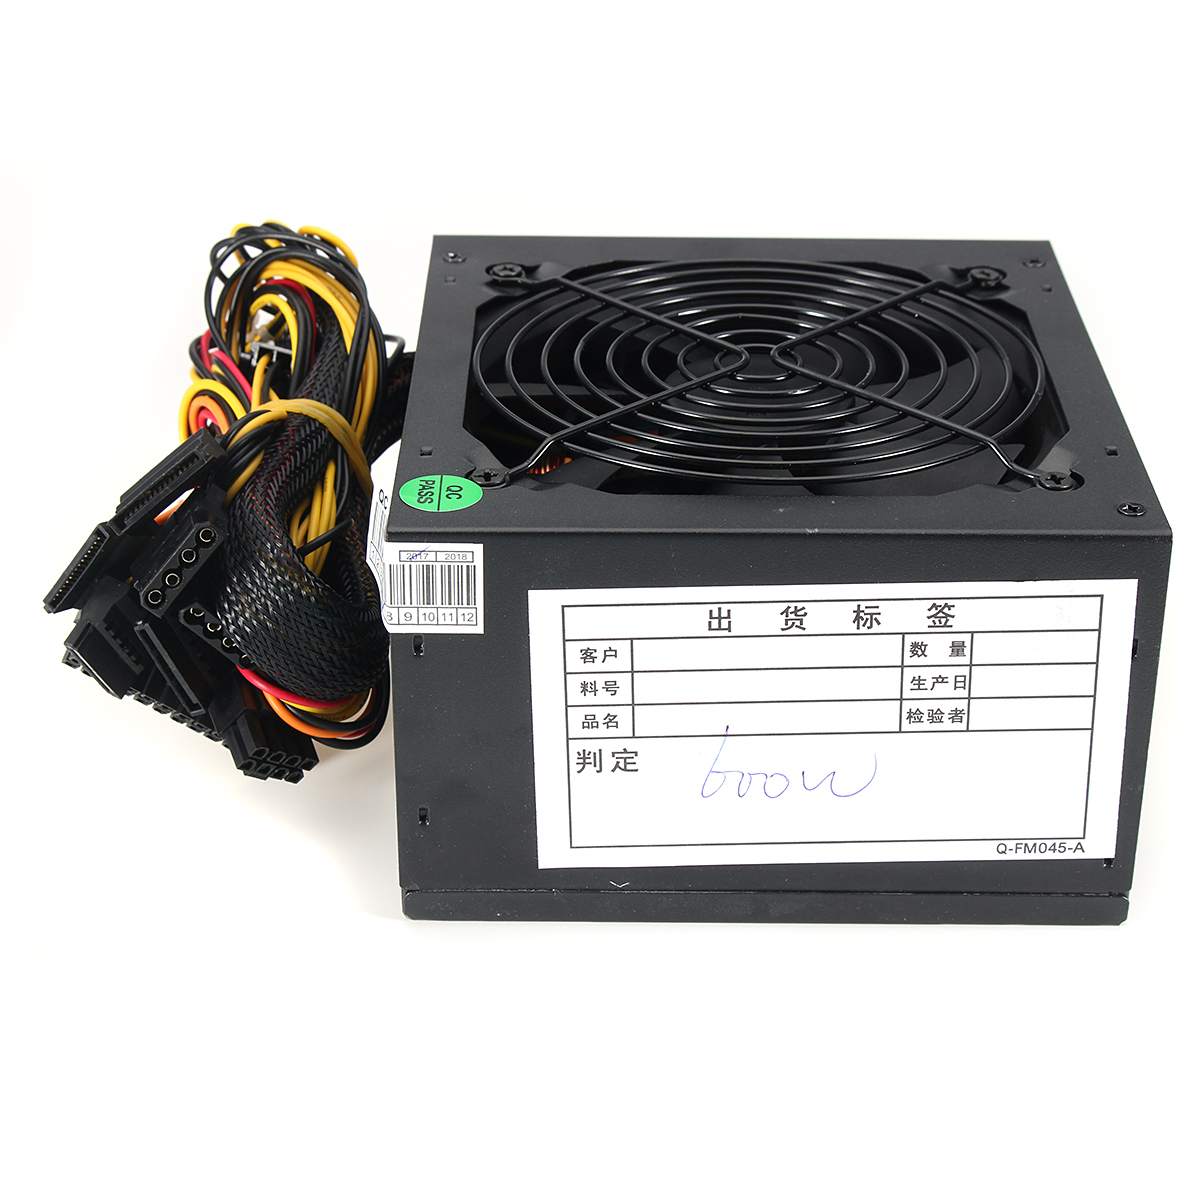 Find 600W PC Power Supply Quiet ATX 12V 24Pins 12CM Cooling Fan Desktop Computer Power Supply Gaming PSU for AMD Intel for Sale on Gipsybee.com with cryptocurrencies